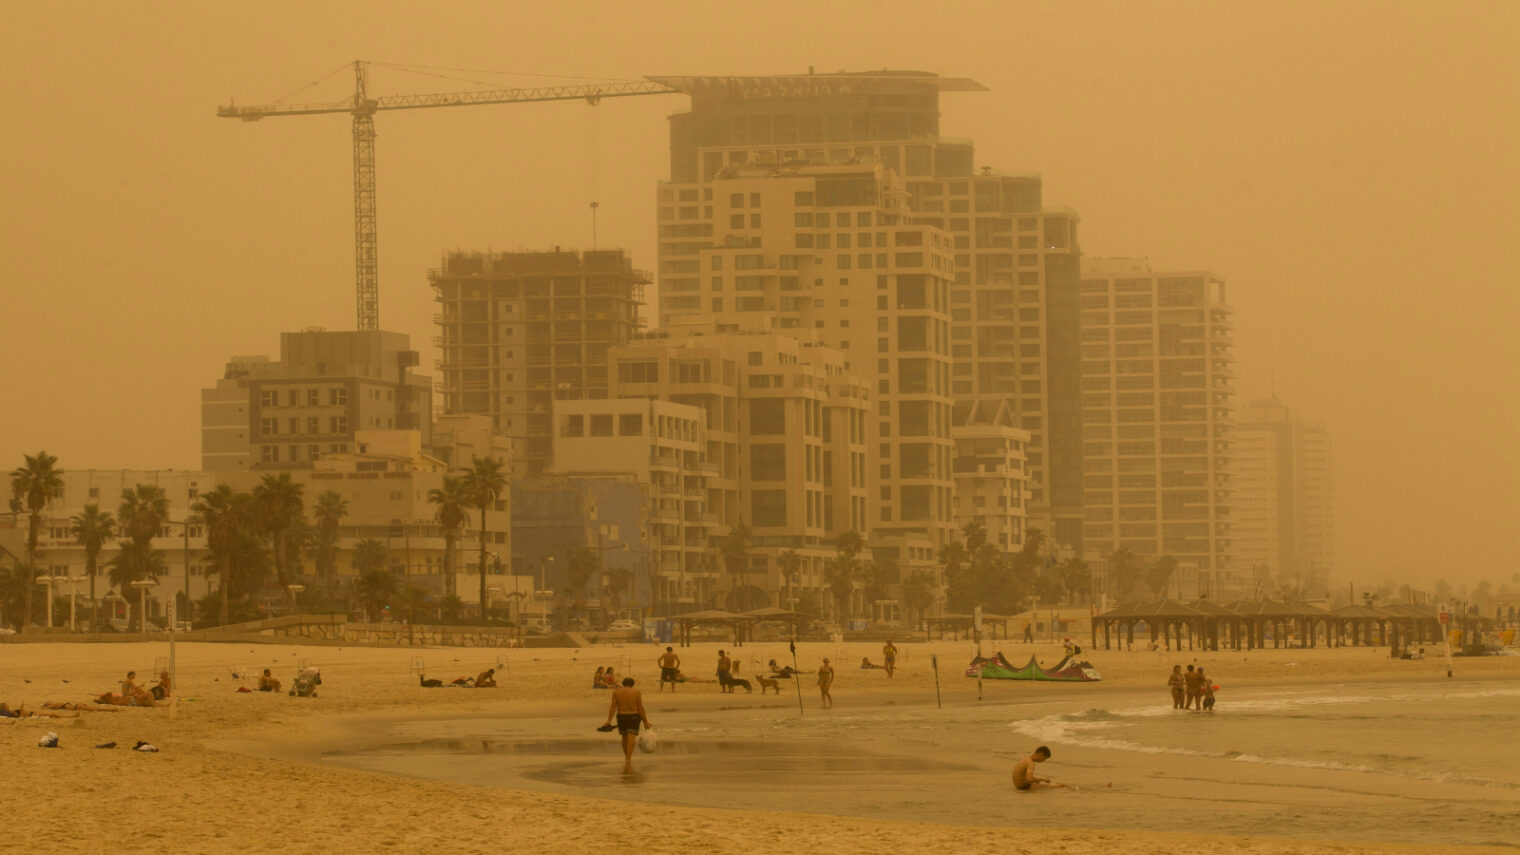 The Tel Aviv beach seen through the sand storm that hit Israel on September 8, 2015. Photo by Miriam AlsterFLASH90